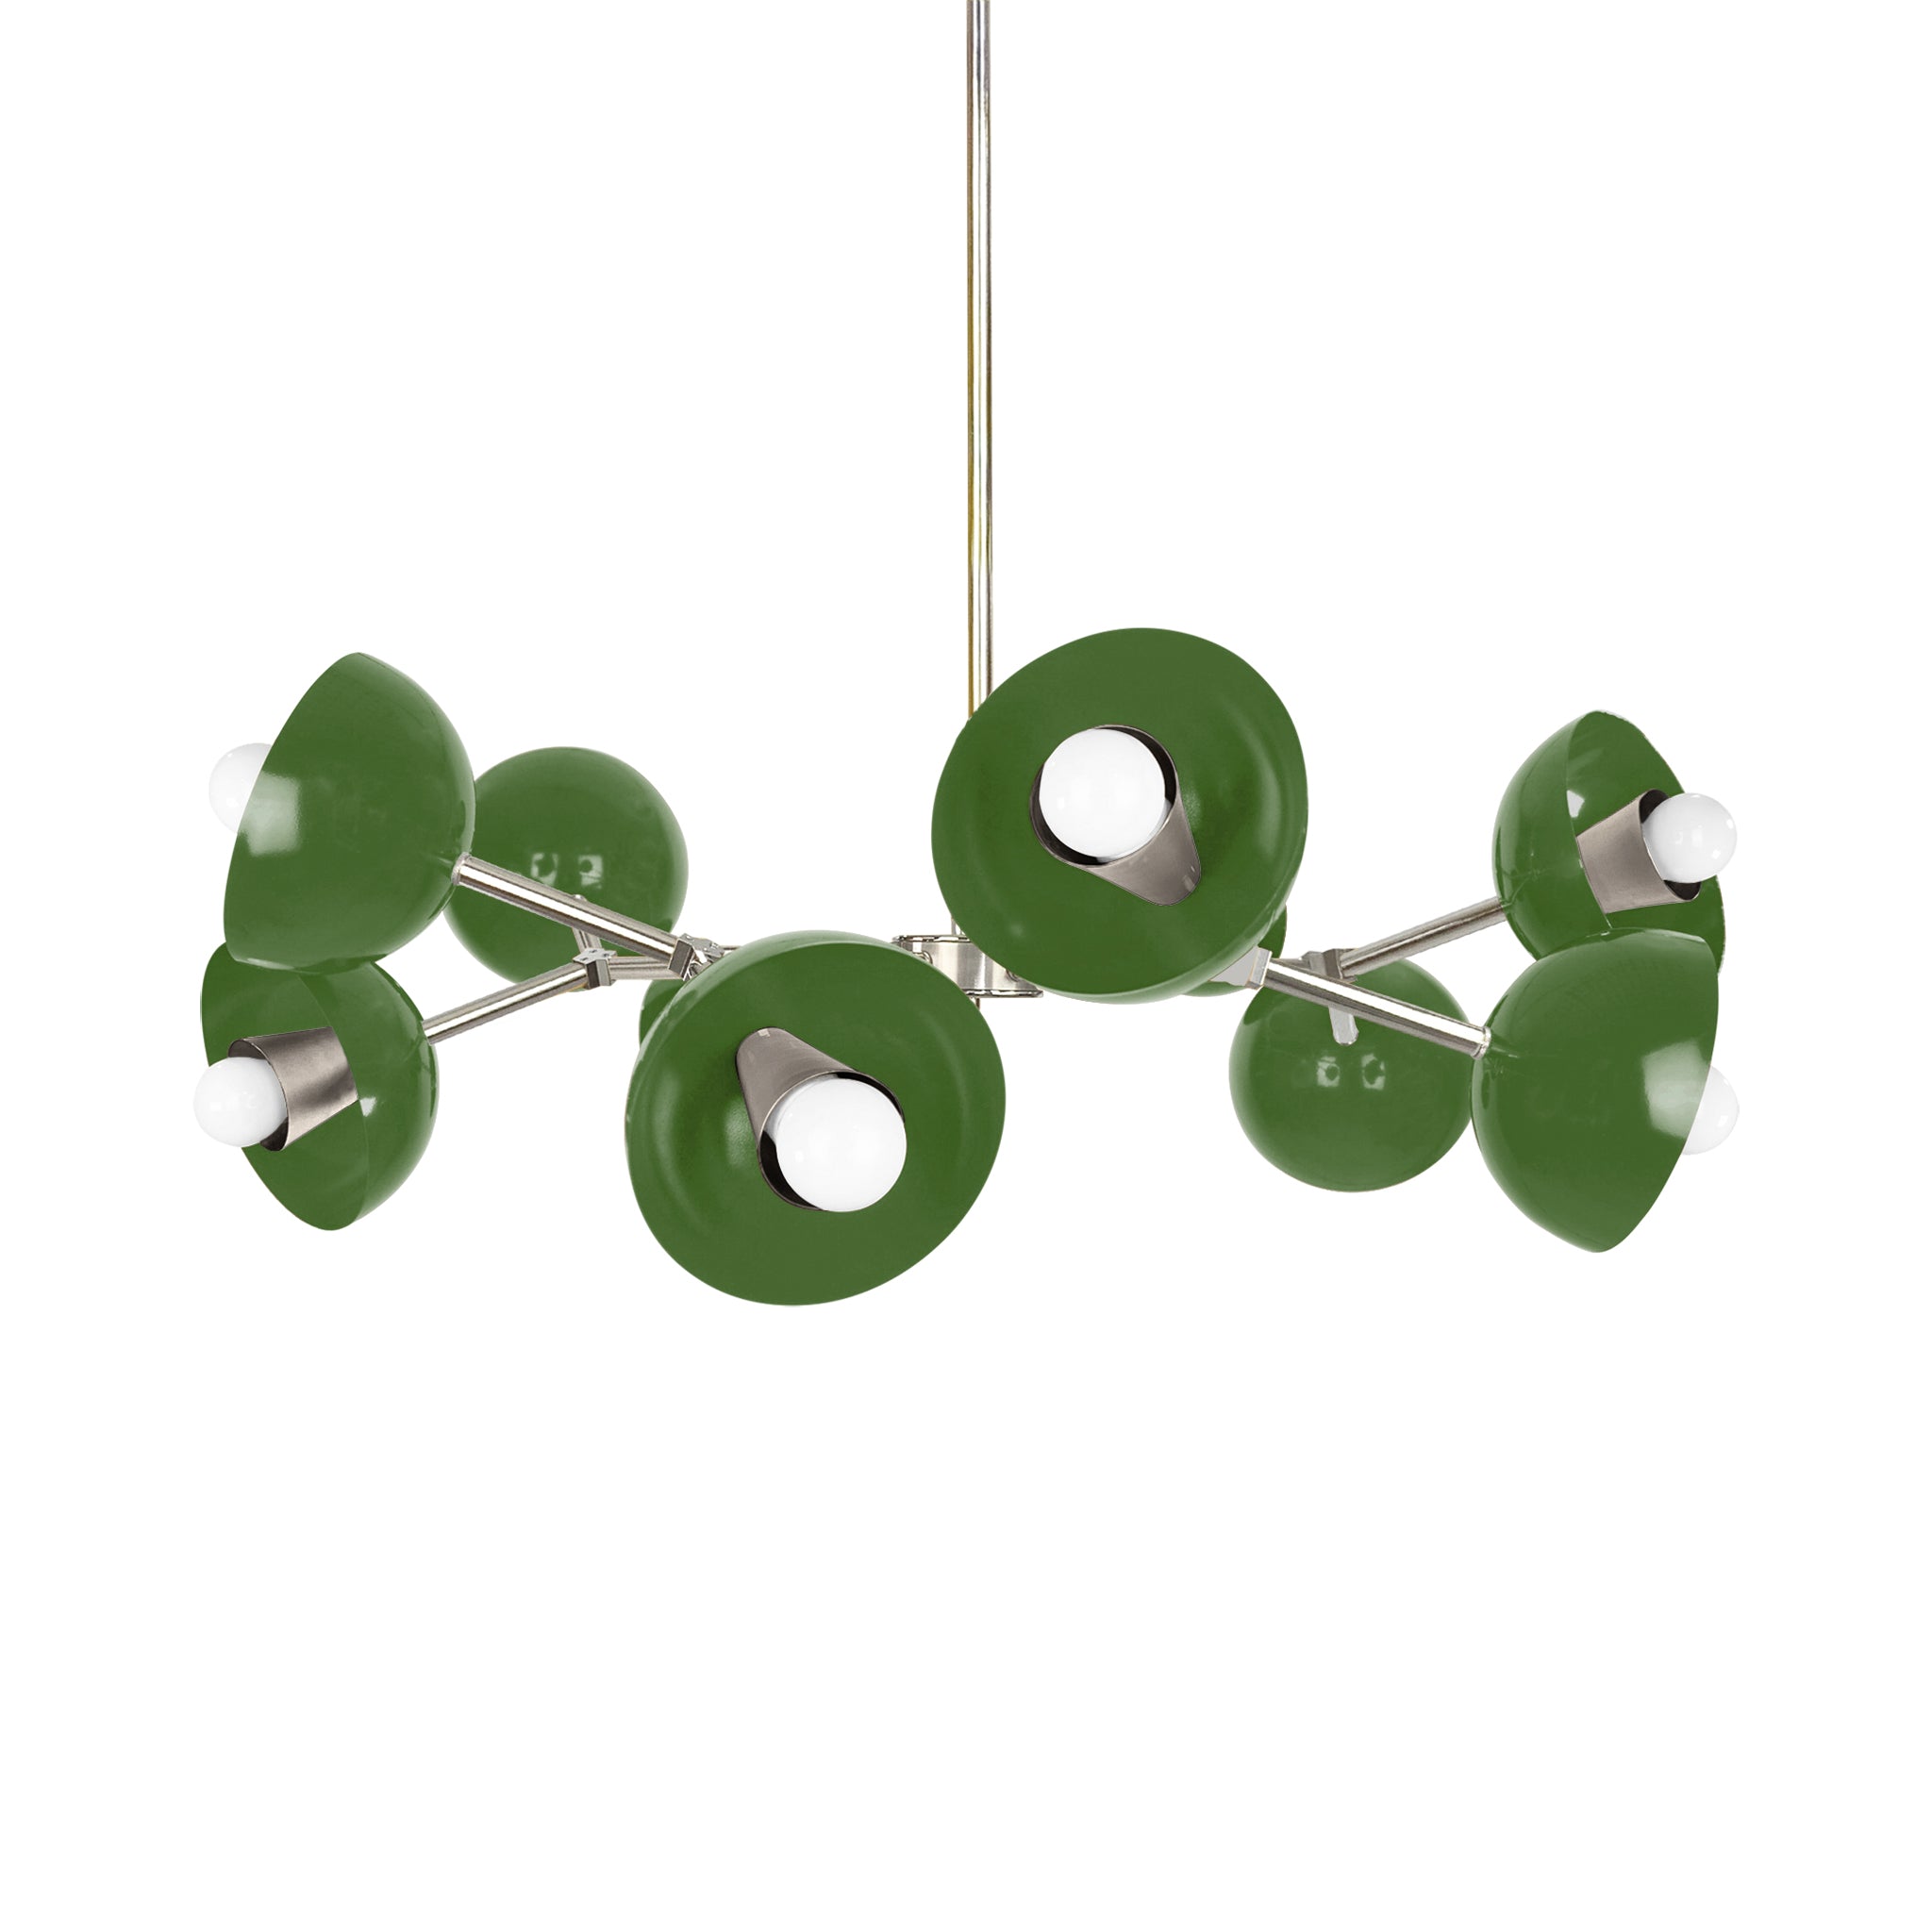 Nickel and lagoon color Alegria chandelier 30" Dutton Brown lighting